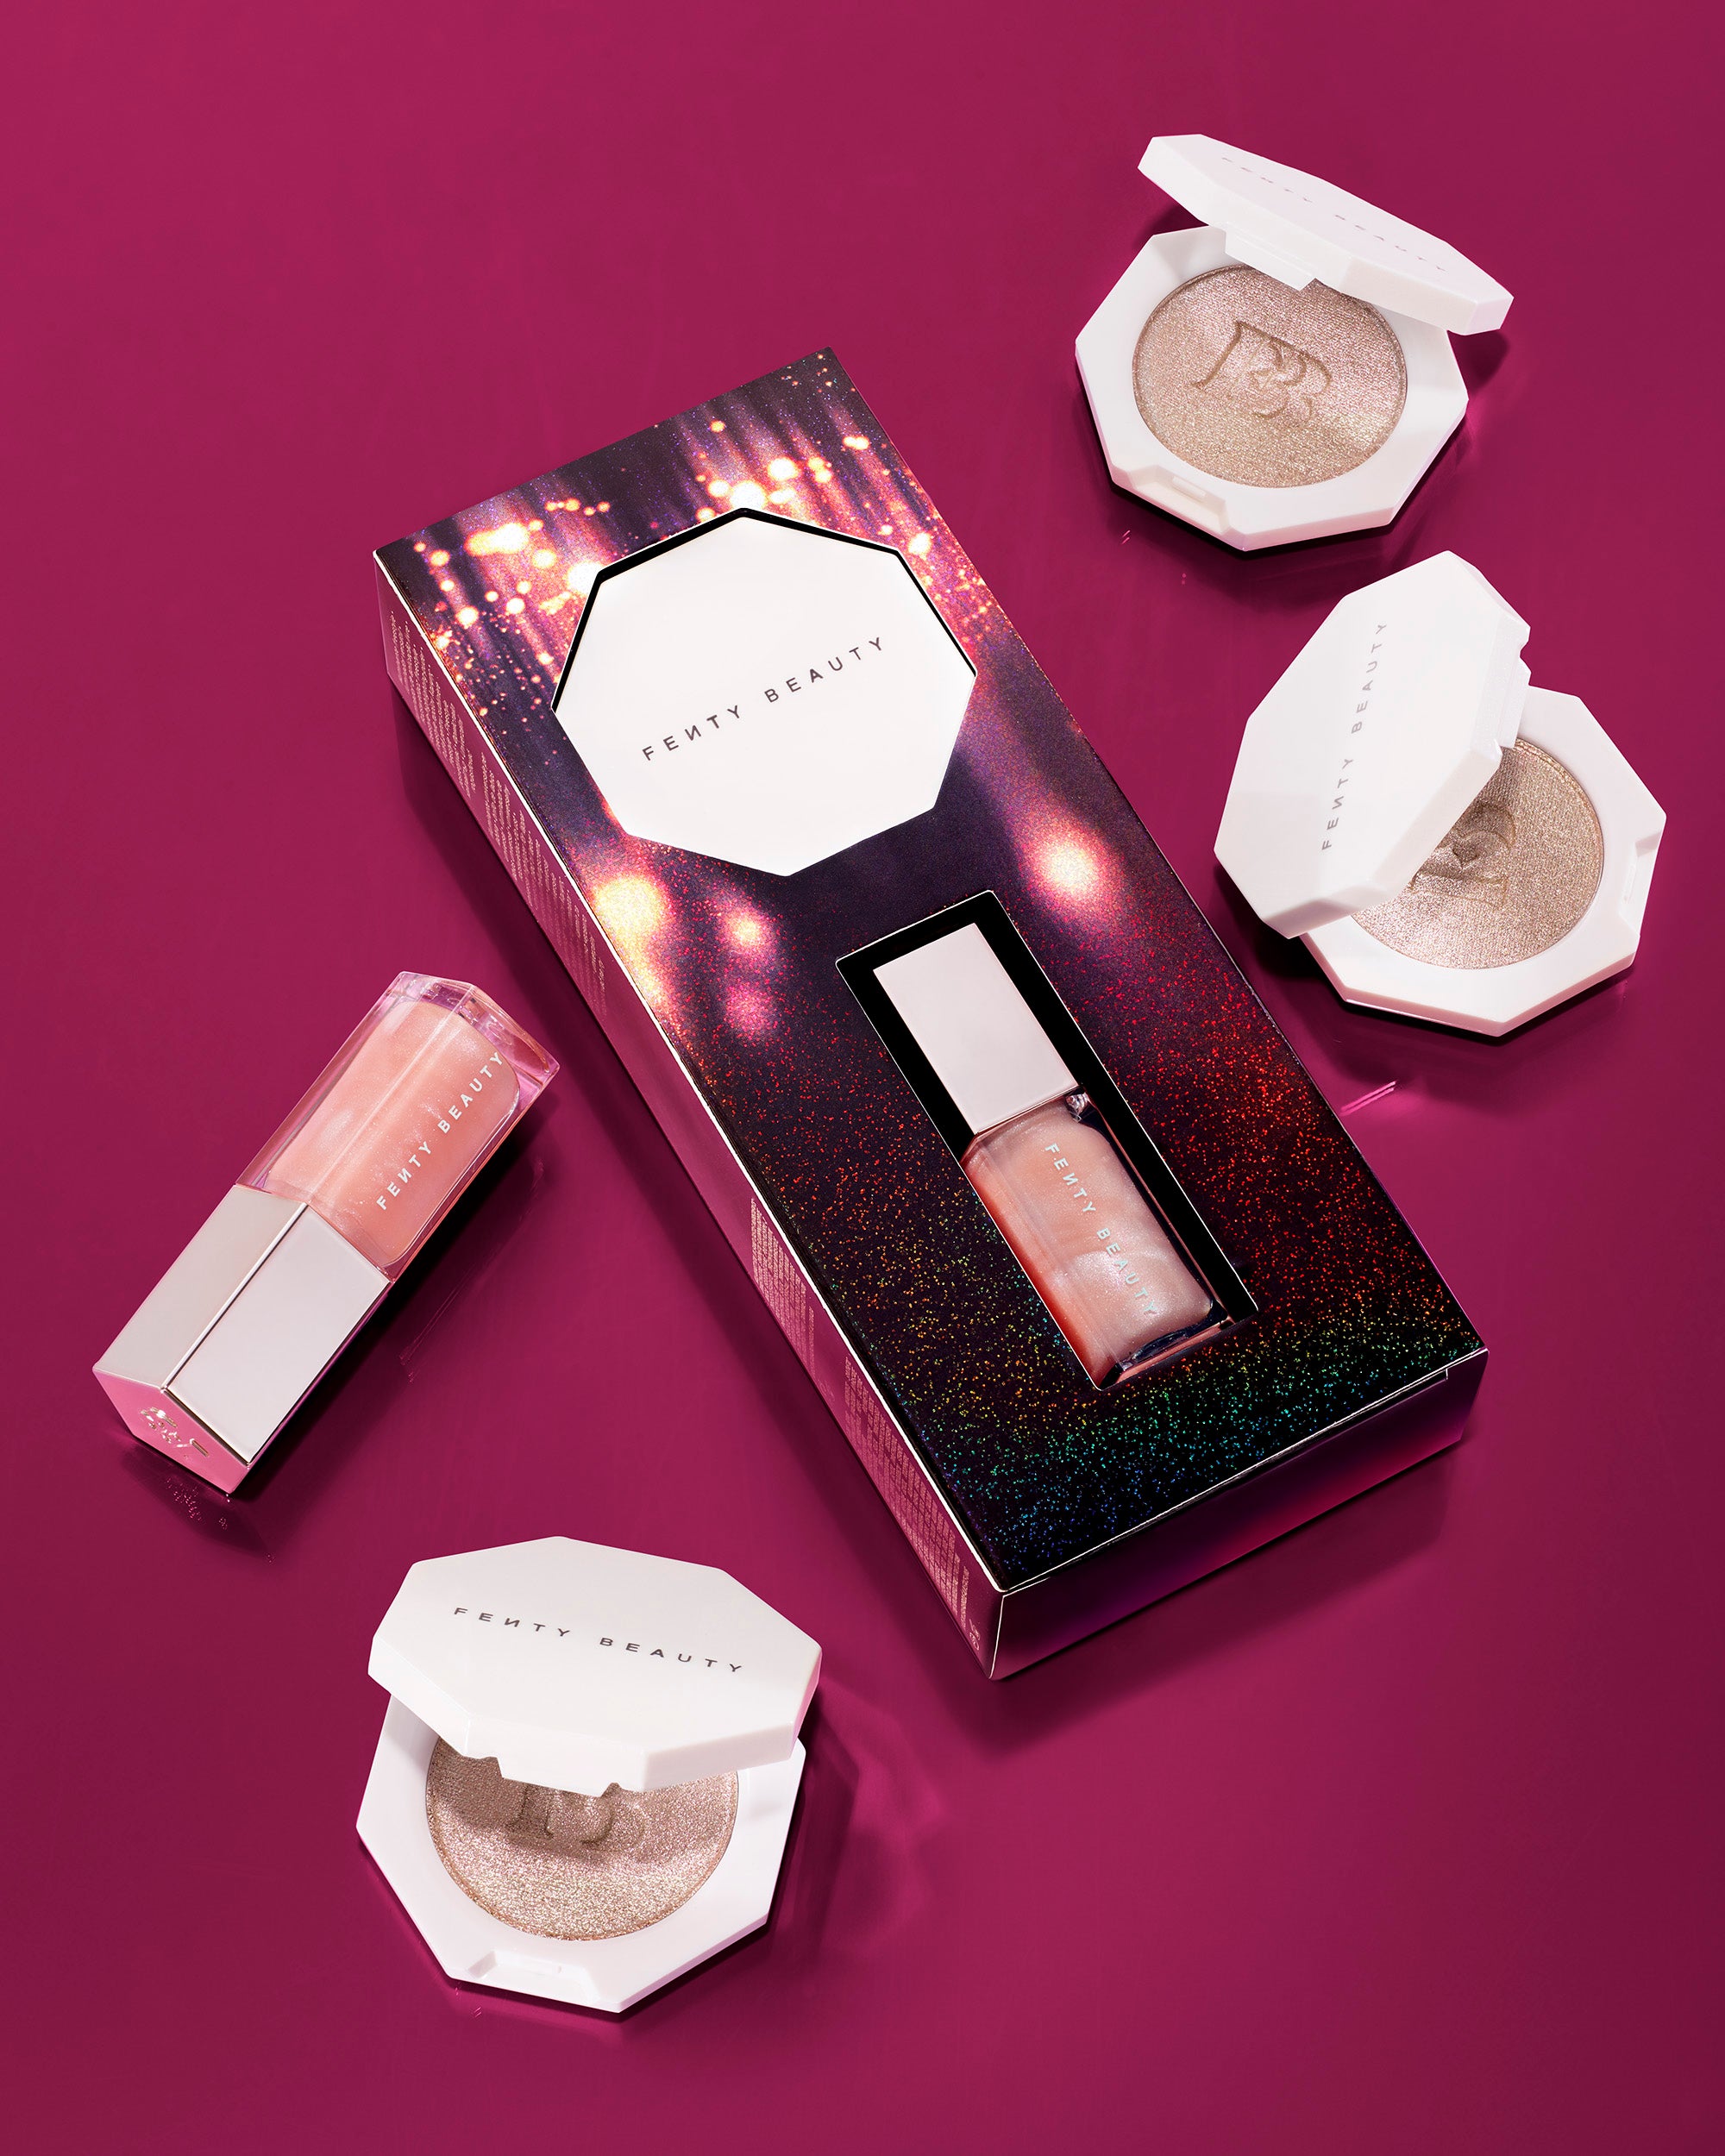 Fenty Beauty Launches New Products For 